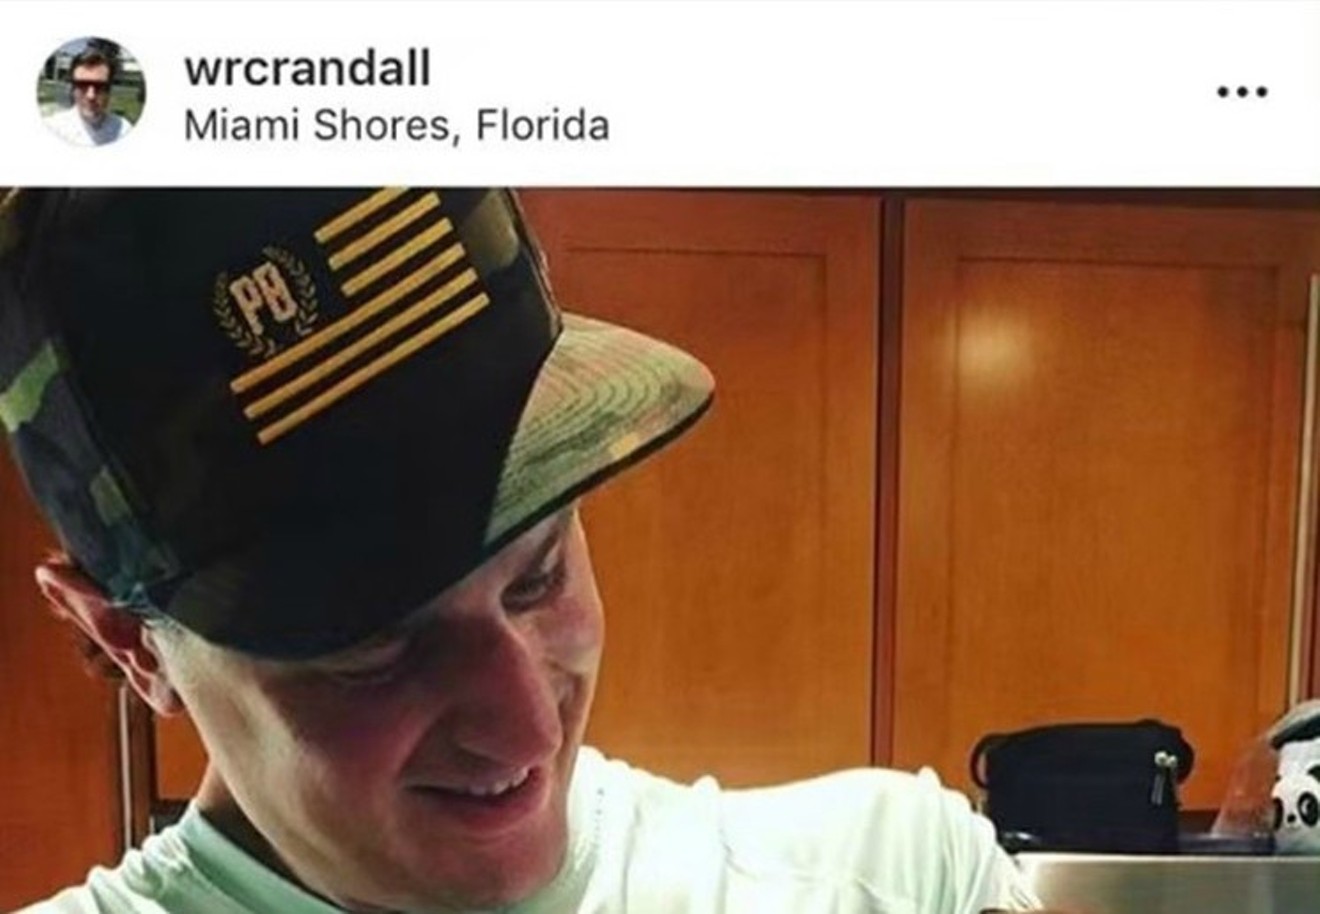 A screenshot of a now-deleted Instagram post showing Crandall wearing a hat with the Proud Boys' logo.